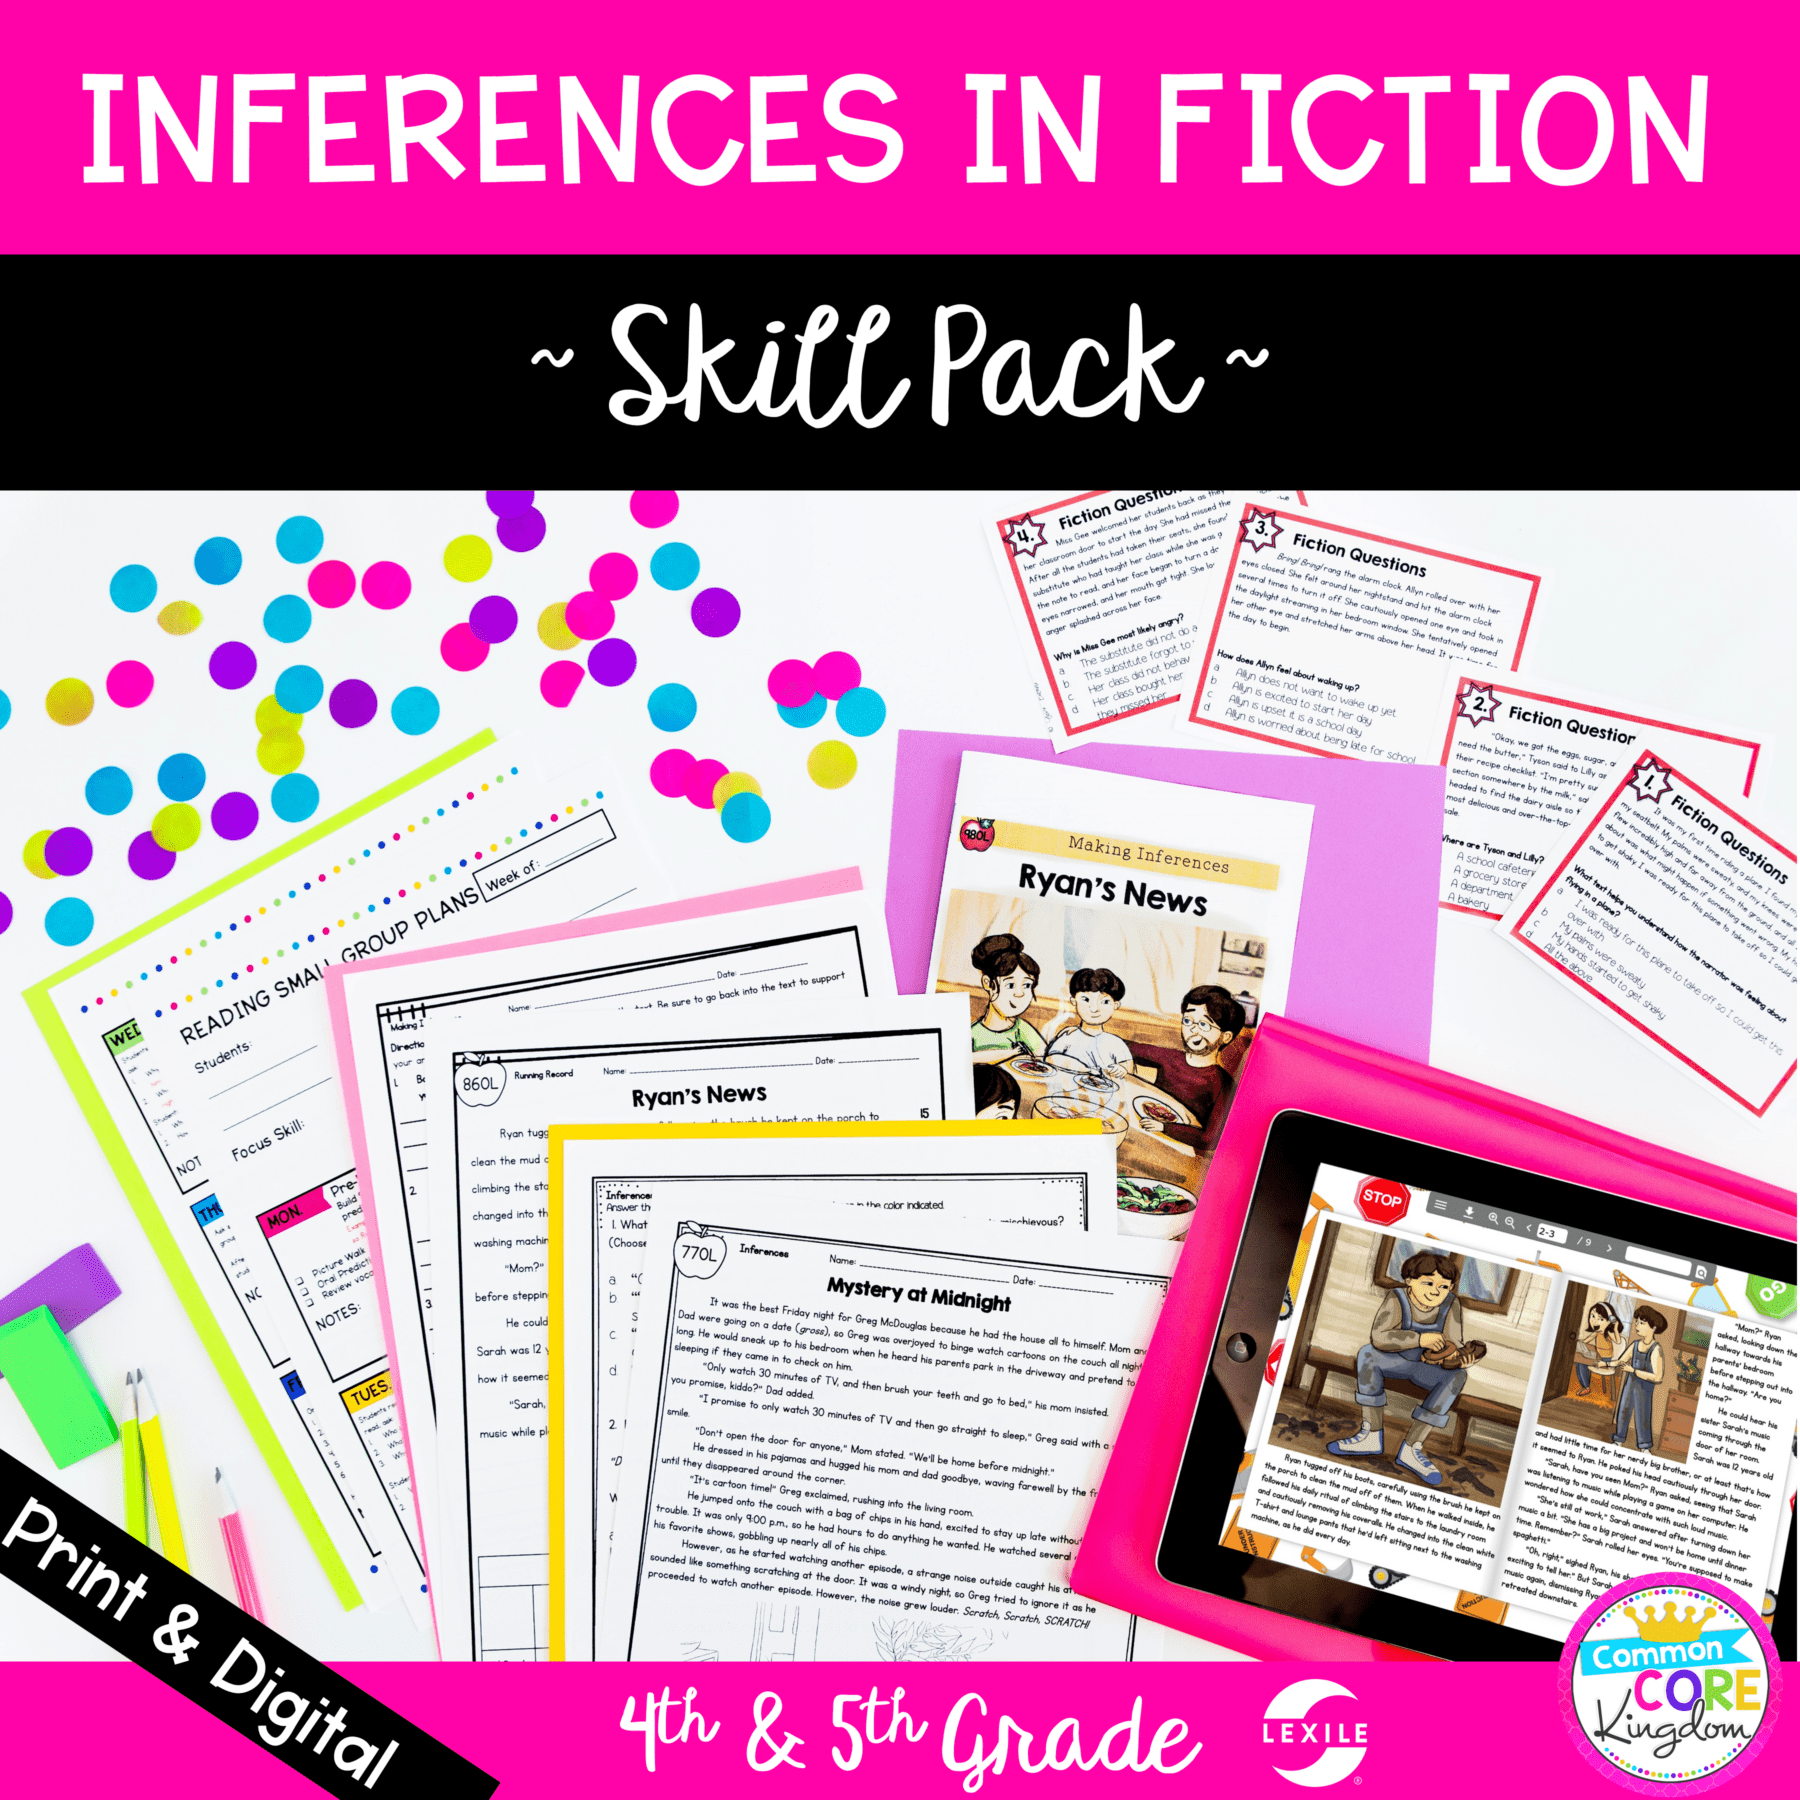 Inferences in Nonfiction Skill Pack for 4th and 5th grade cover showing digital and printable reading comprehension resources